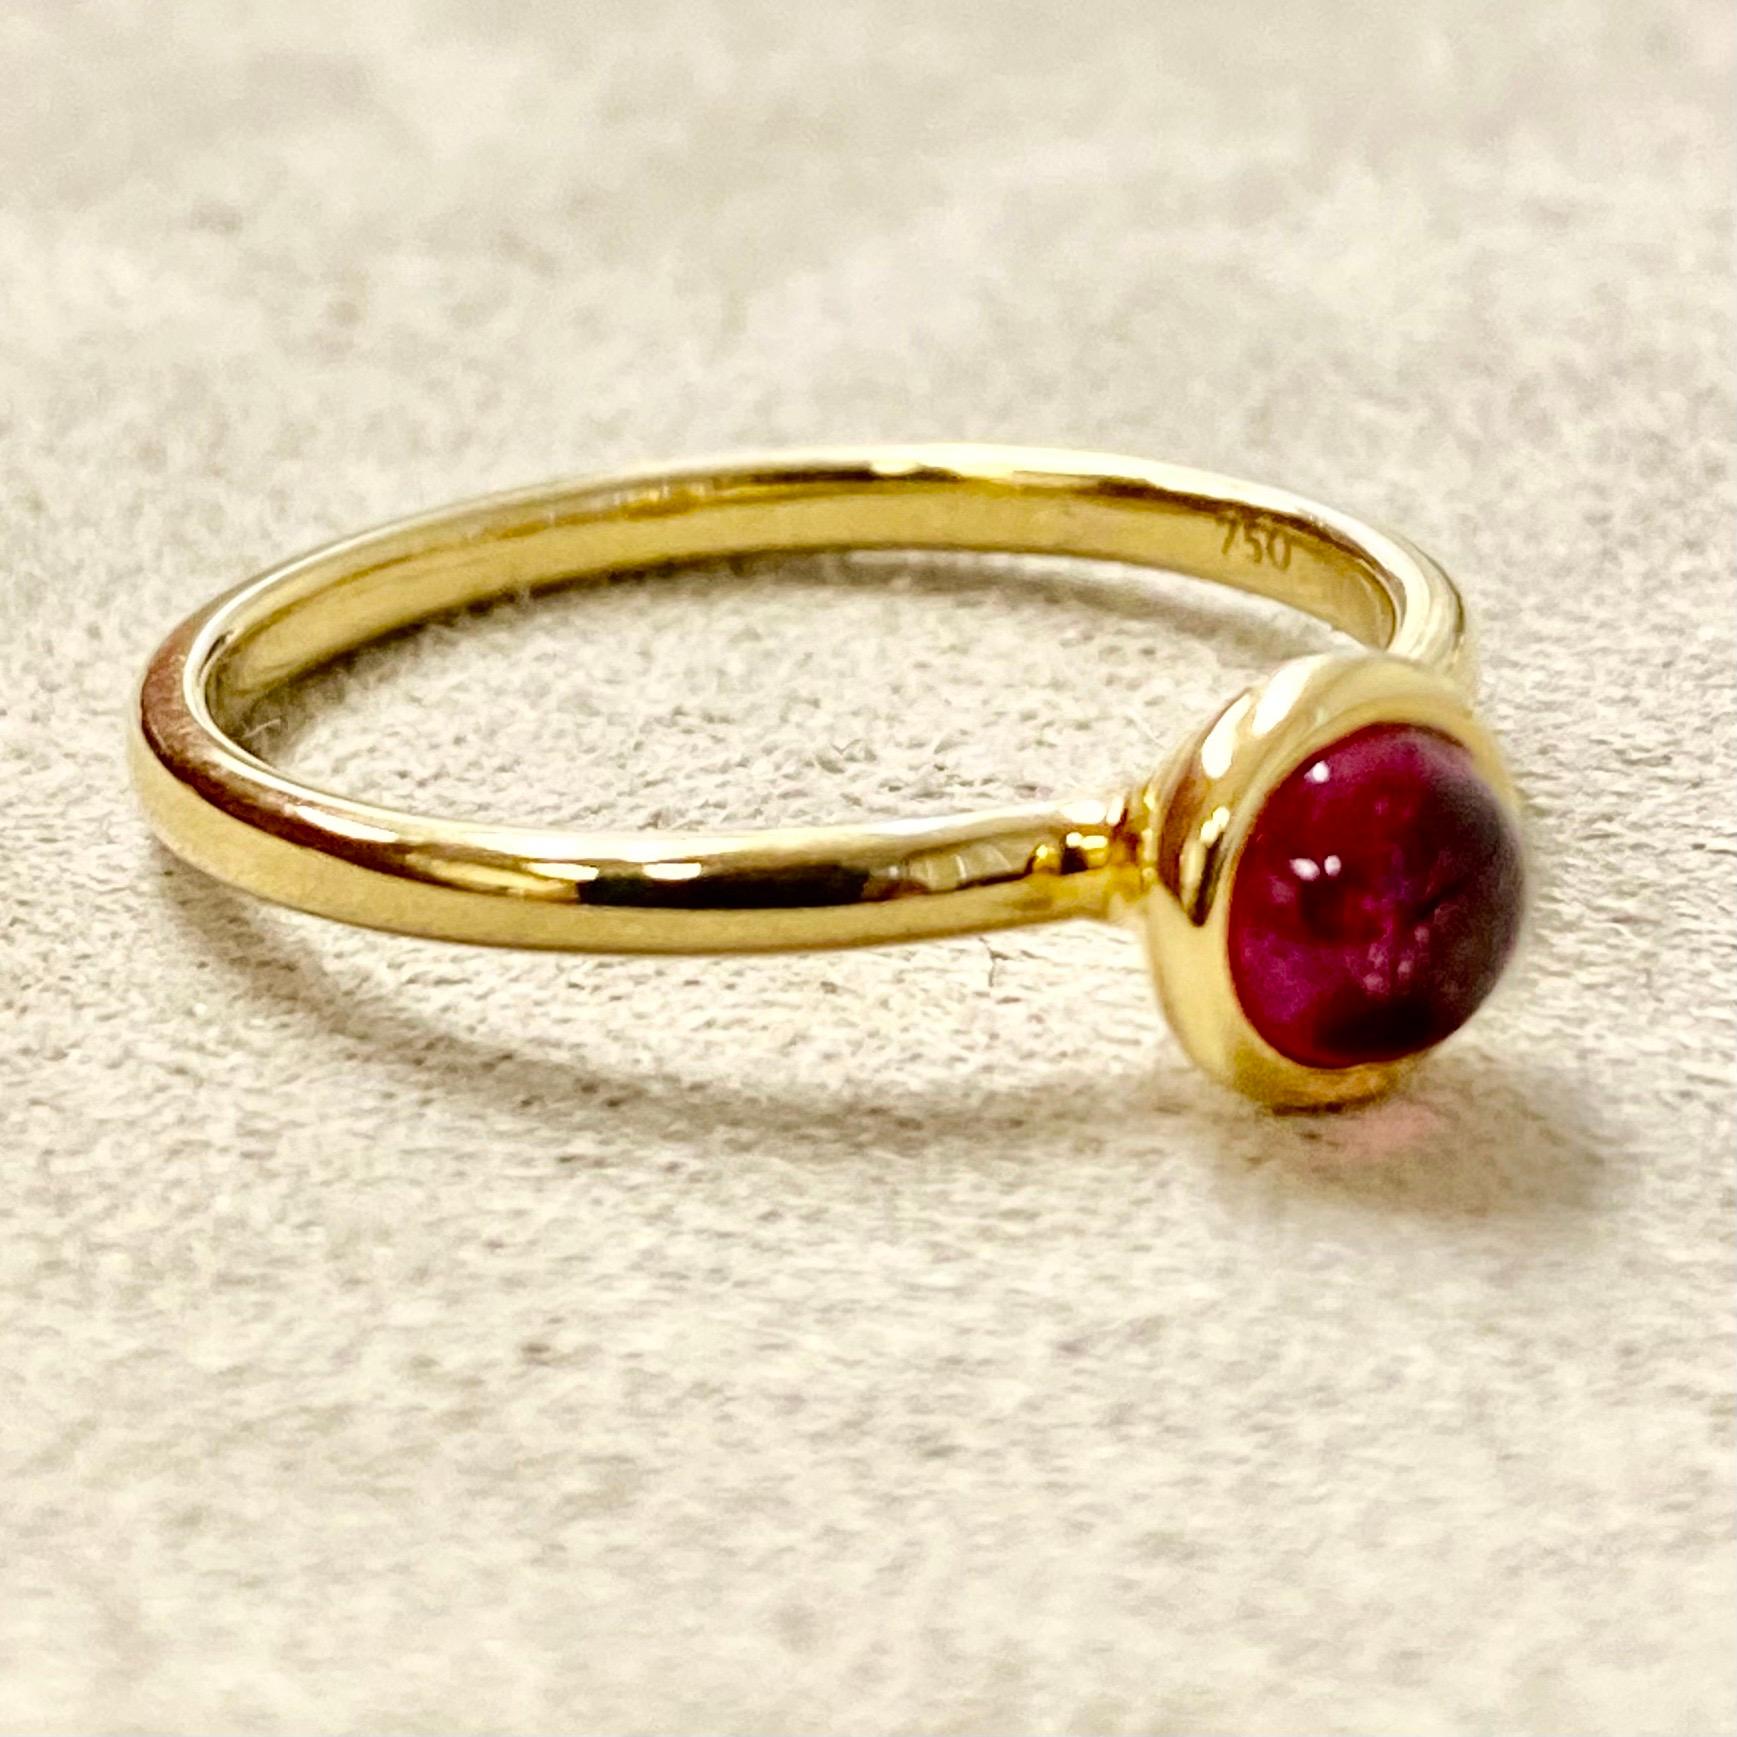 Created in 18 karat yellow gold
Rubellite cabochon
Ring size US 6.5, can be sized upon request.

Handcrafted in 18 karat golden alloy, this exquisite ring features a Rubellite cabochon and is designed to size US 6.5; however, it can be tailored to